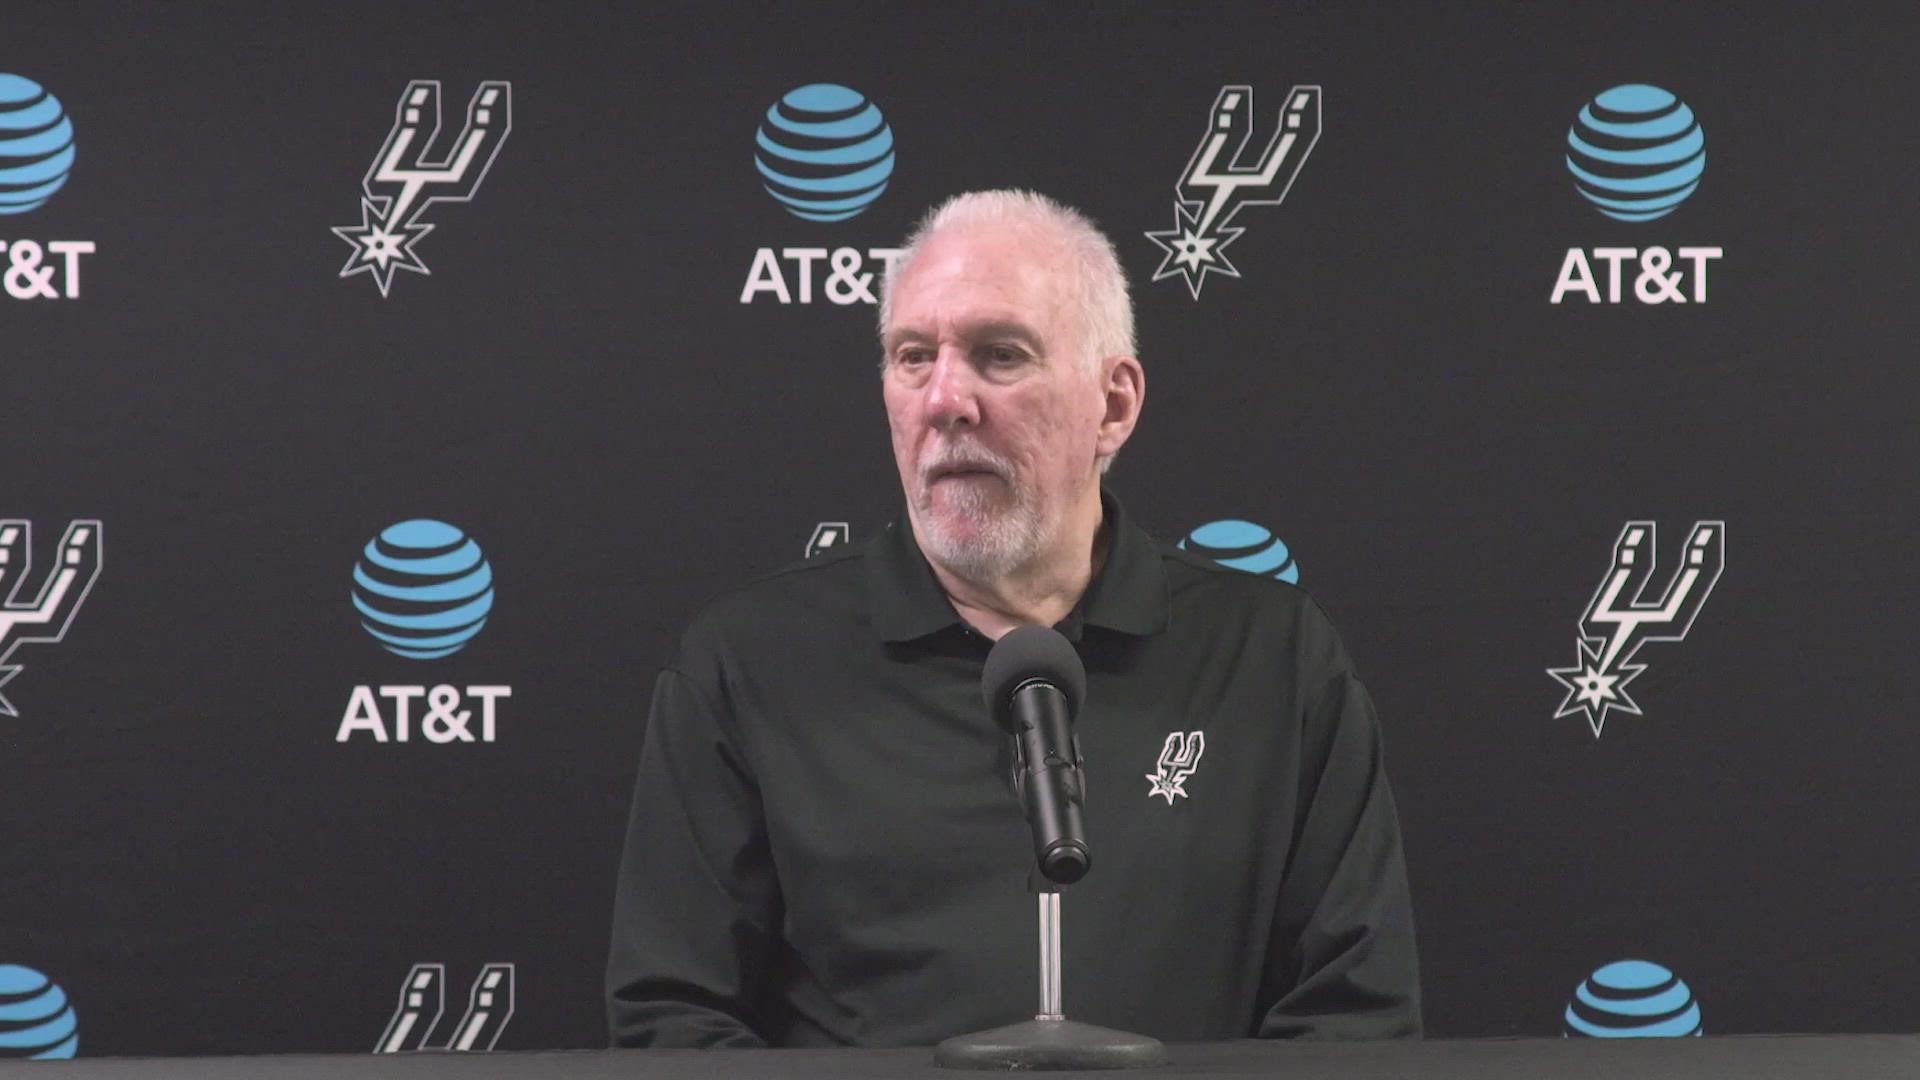 Coach Pop said the two main objectives for the final two games are to stay in rhythm and avoid injuries.